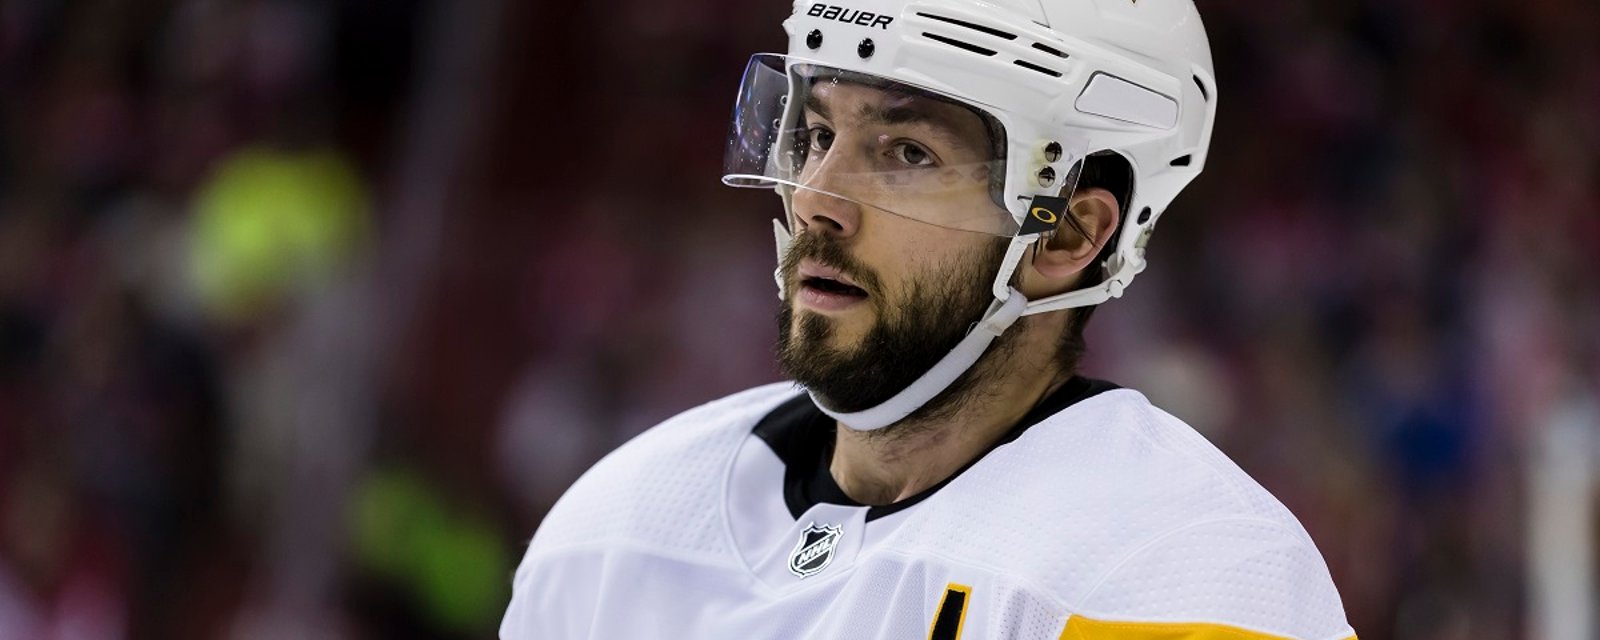 Bad news for Kris Letang and the Pittsburgh Penguins on Monday morning.